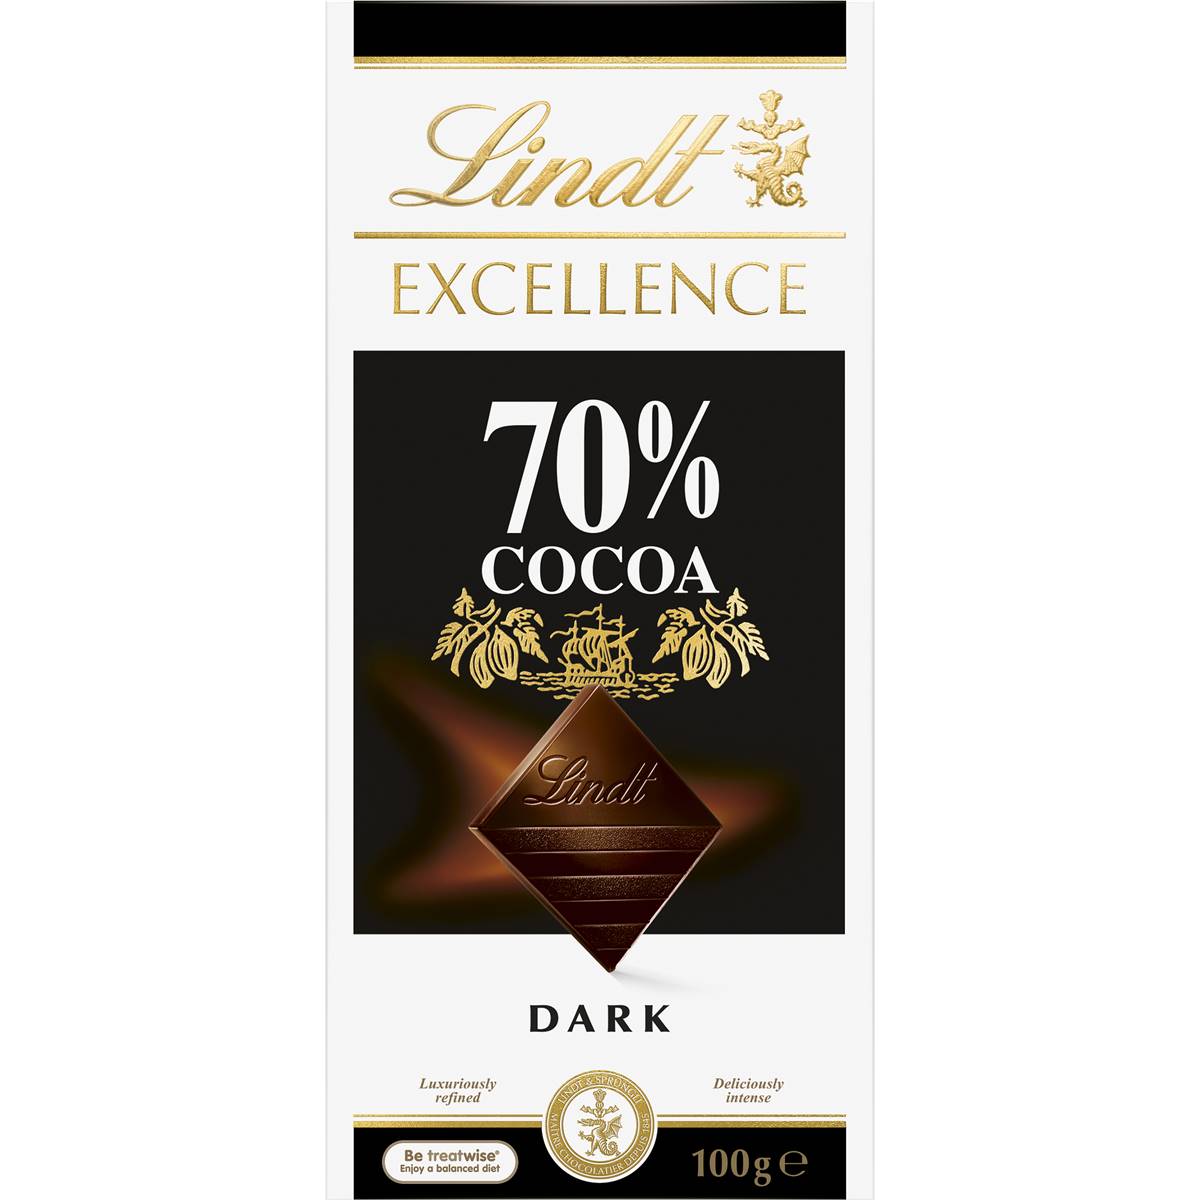 Calories in Lindt Excellence Dark Chocolate 70% Cocoa Block